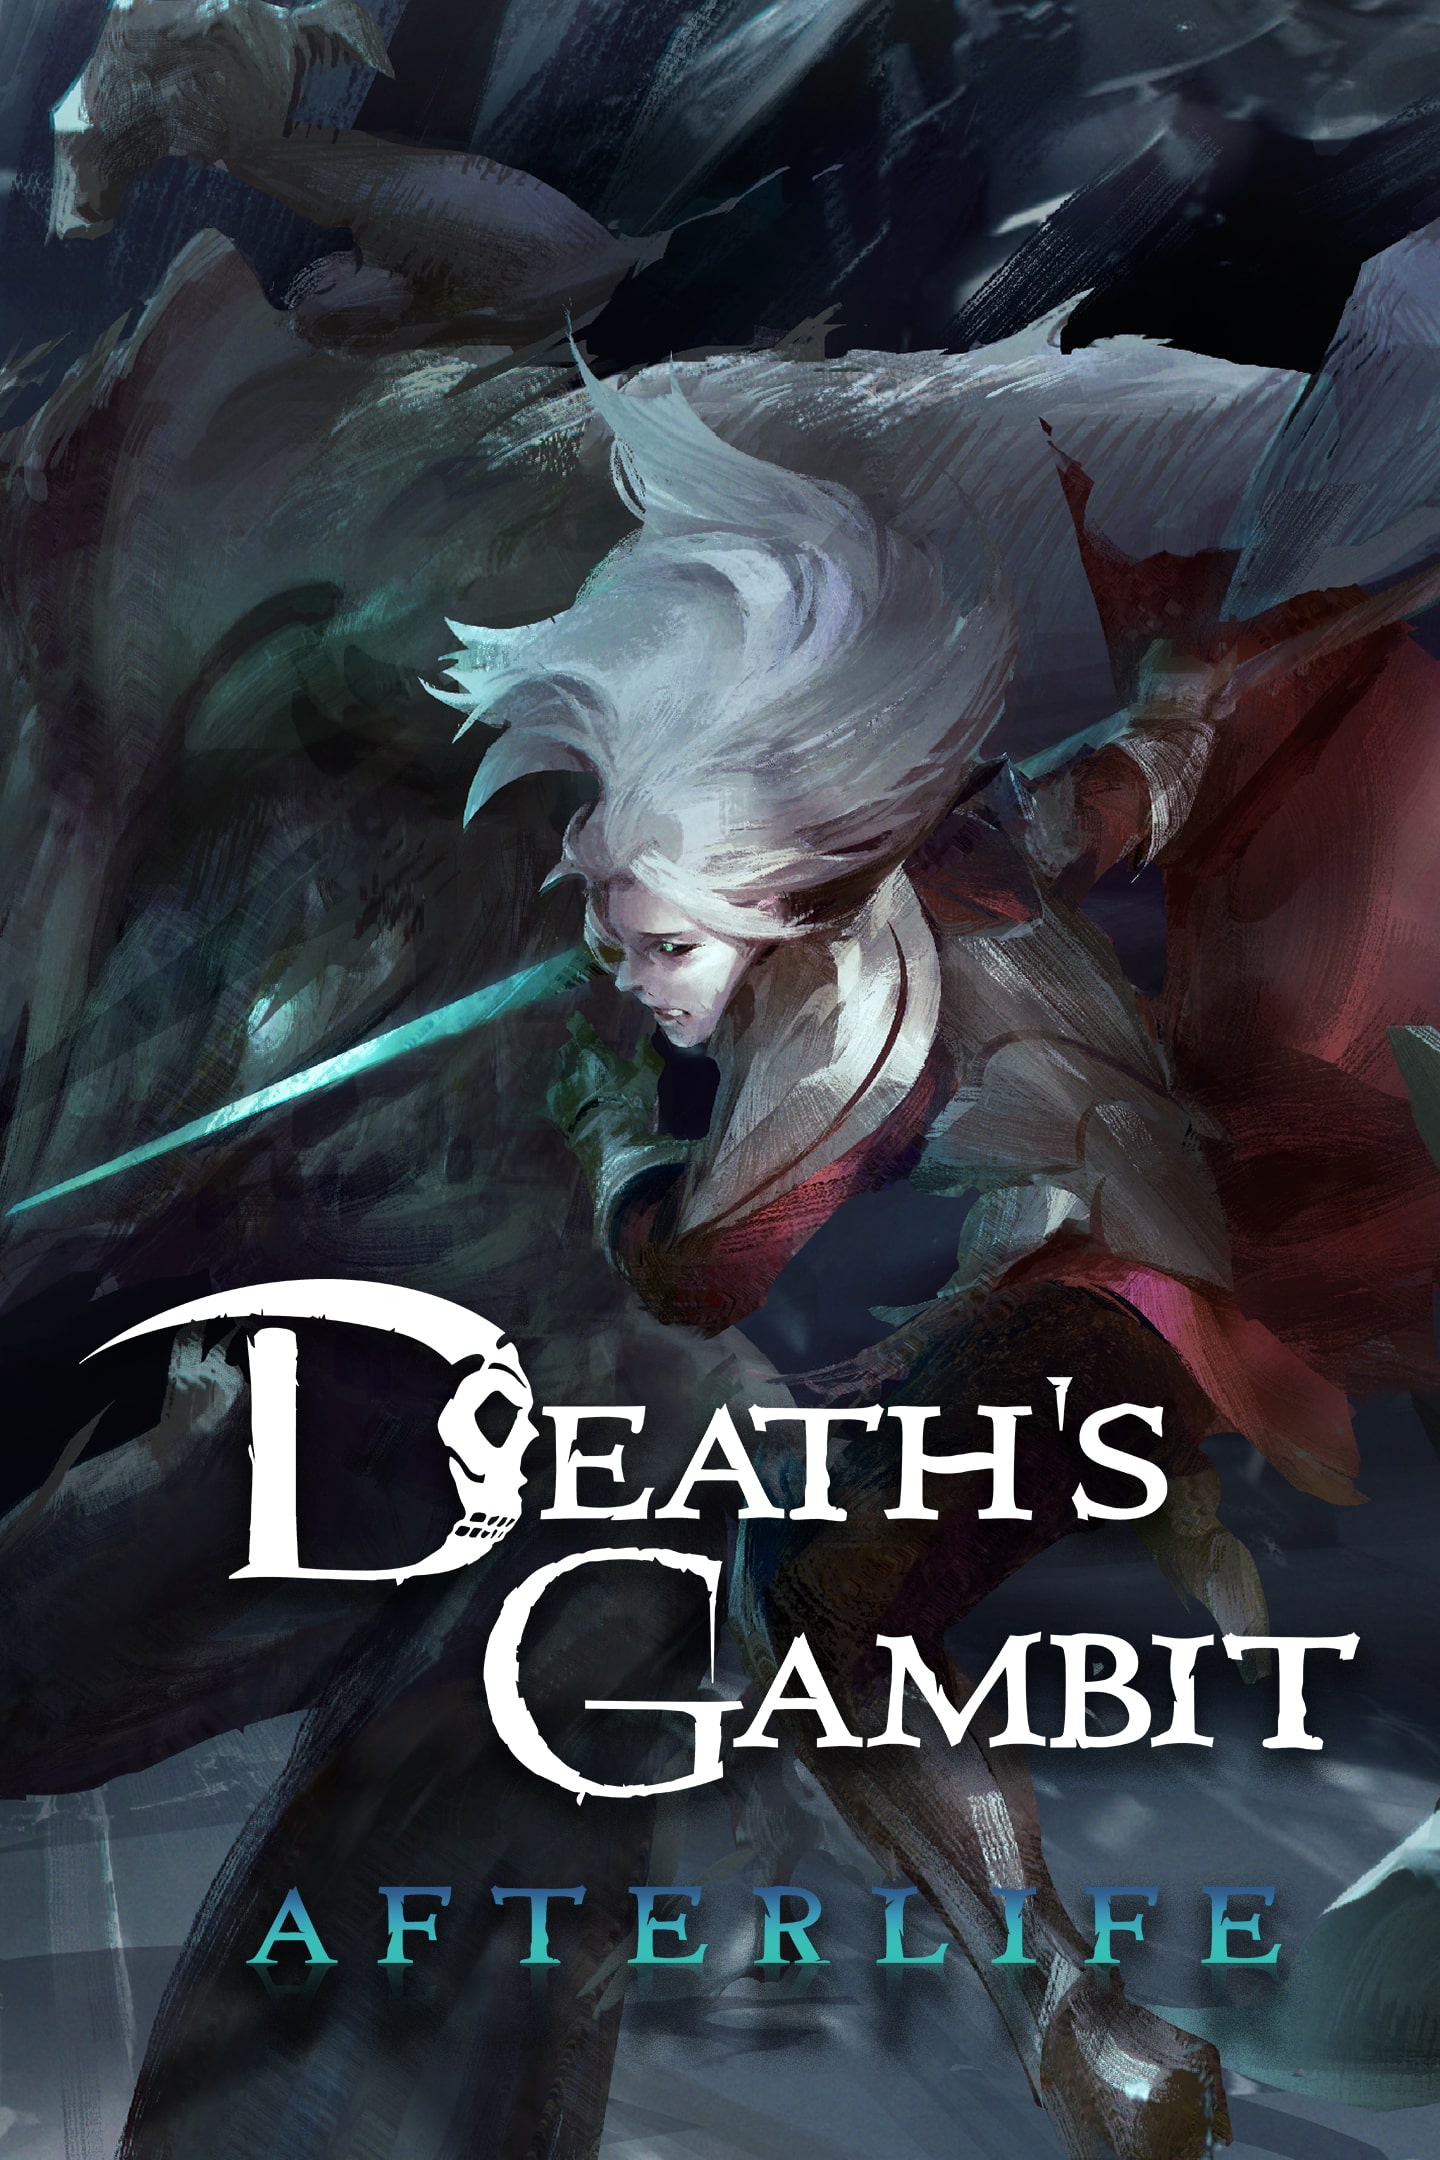 Buy Death's Gambit from the Humble Store and save 35%